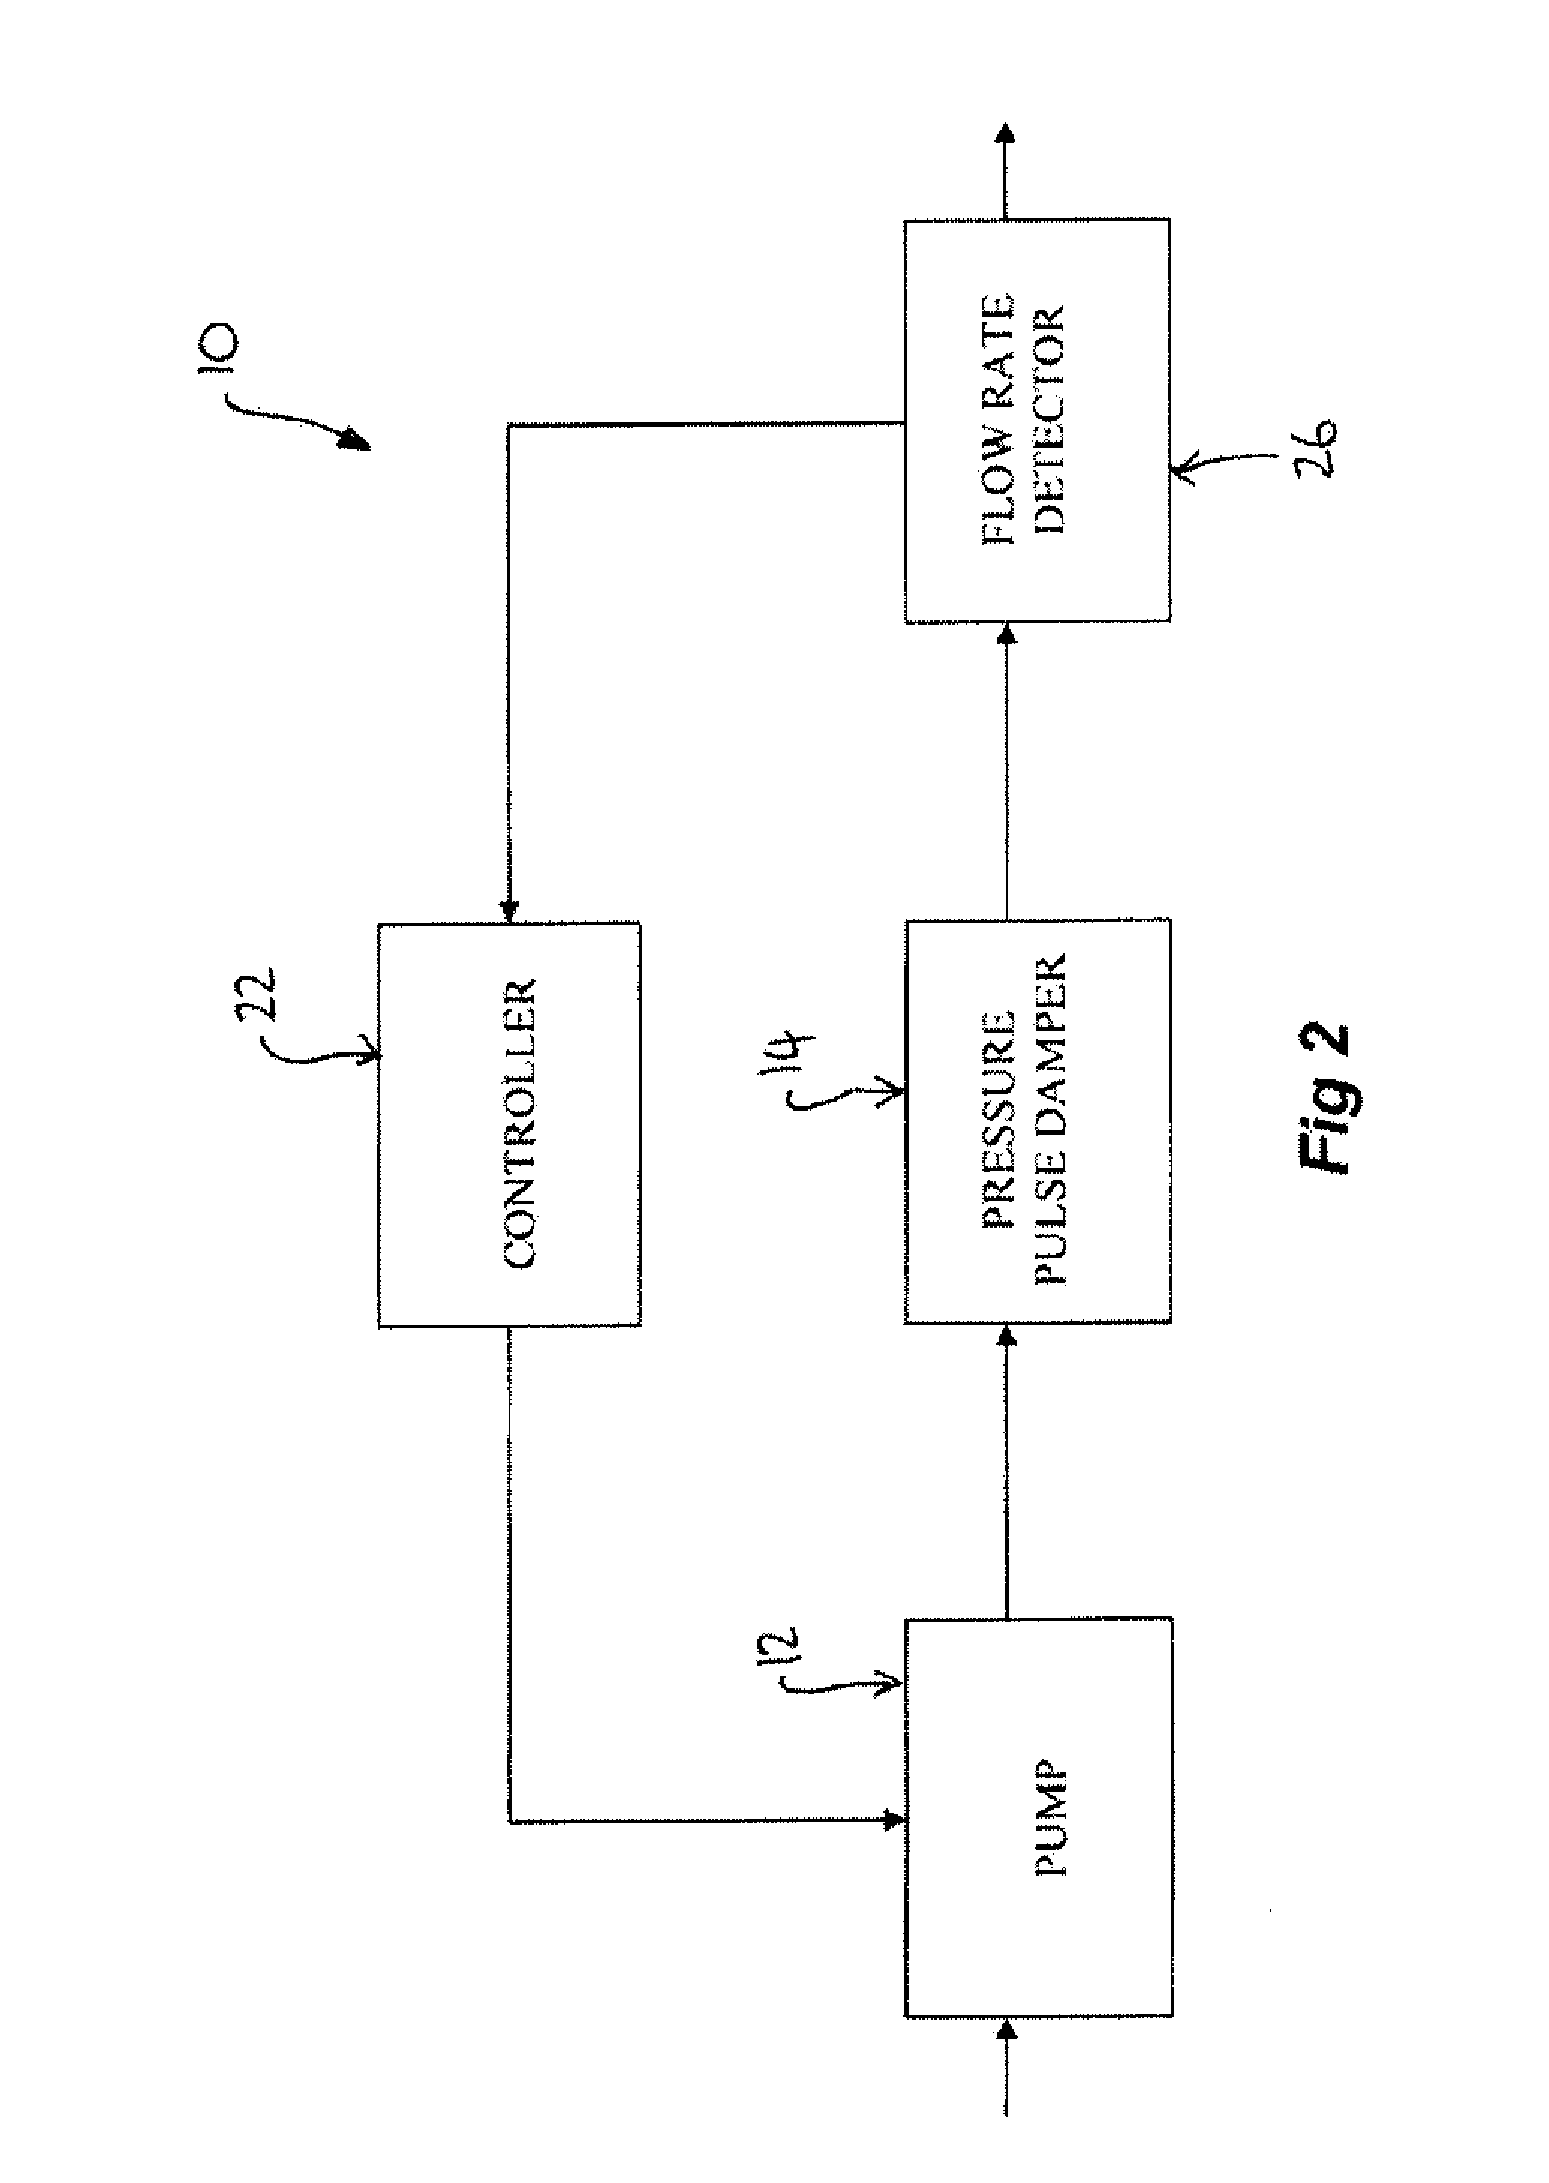 System and method for fluid flow control